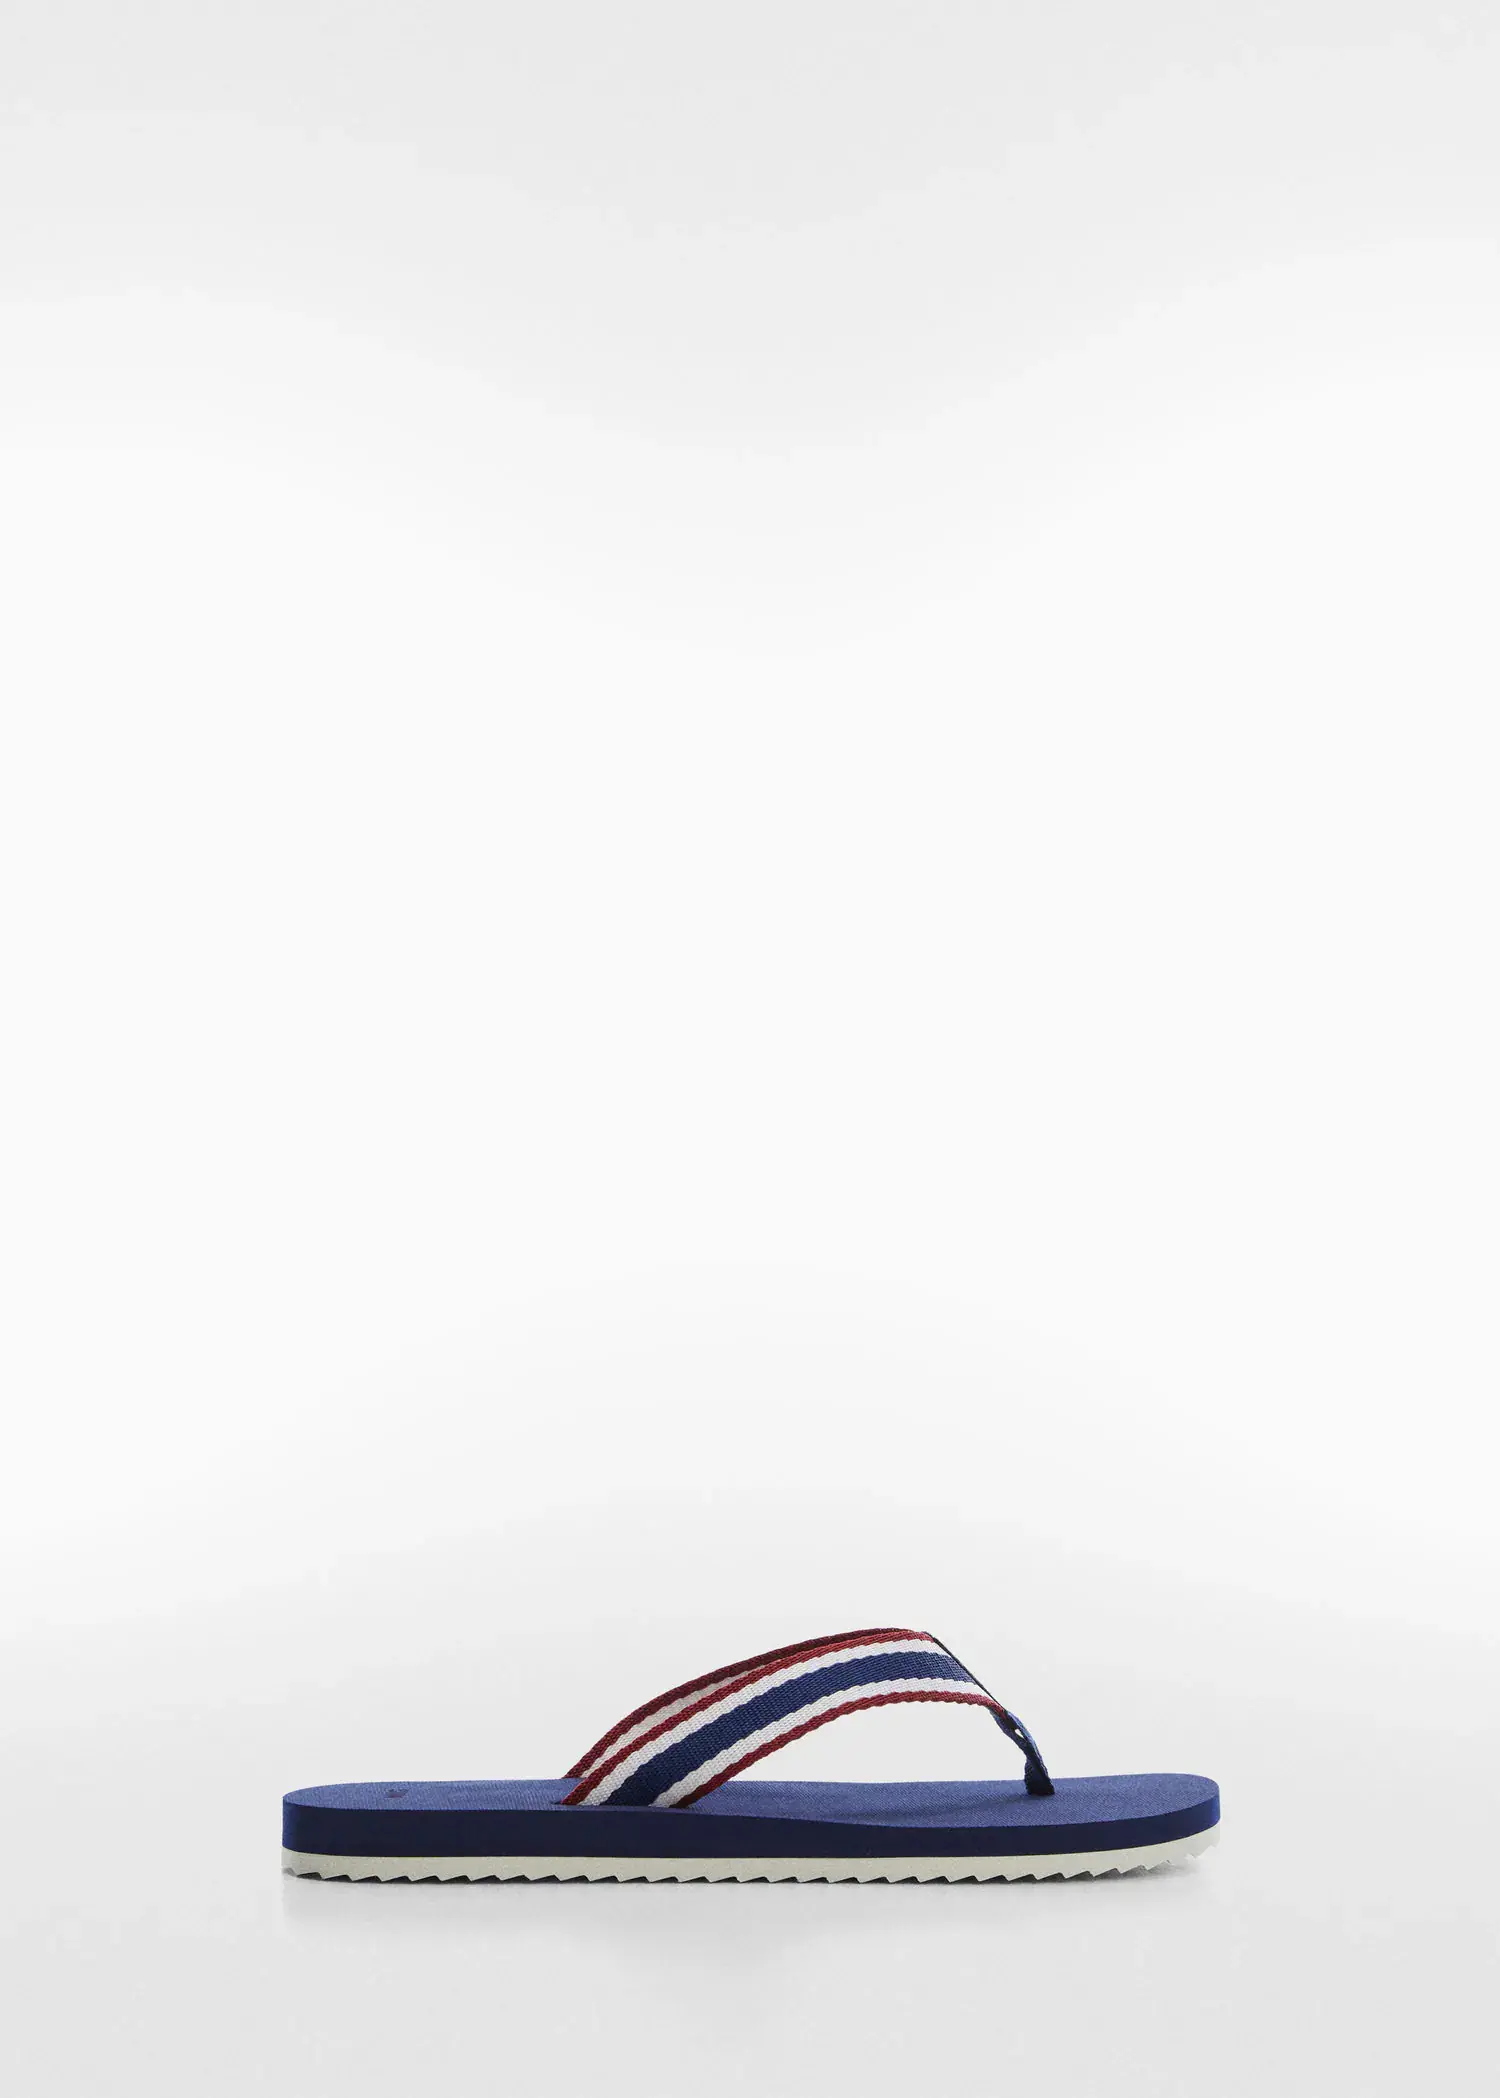 Mango Flip-flops with contrasting colour straps. a pair of blue flip flops on top of a white surface. 